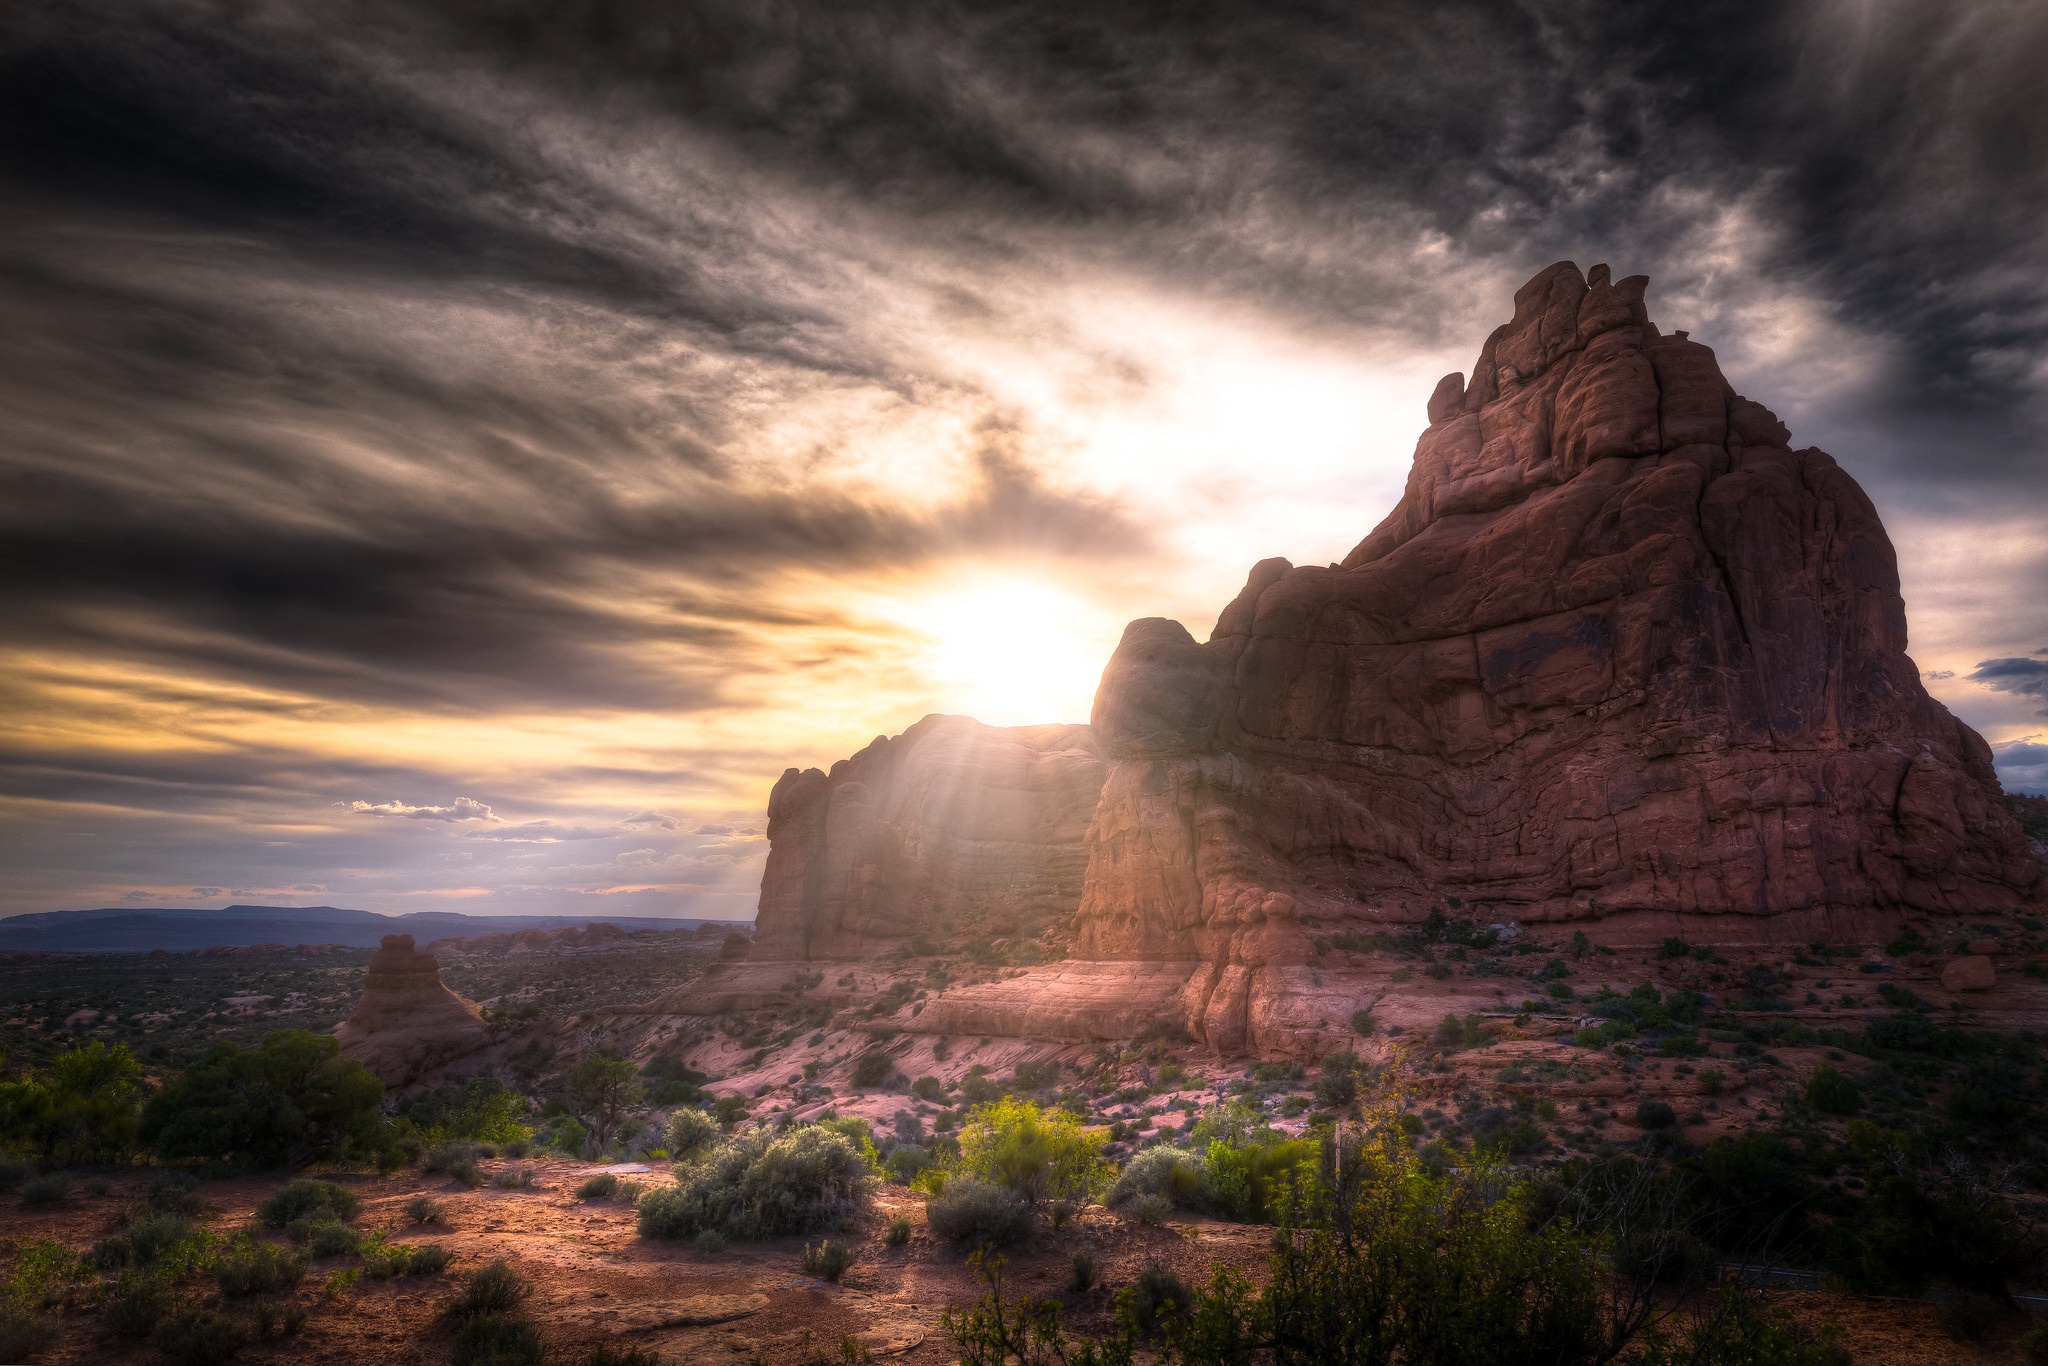 General 2048x1366 Colorado USA Arches National Park nature landscape rocks rock formation shrubbery sunlight clouds